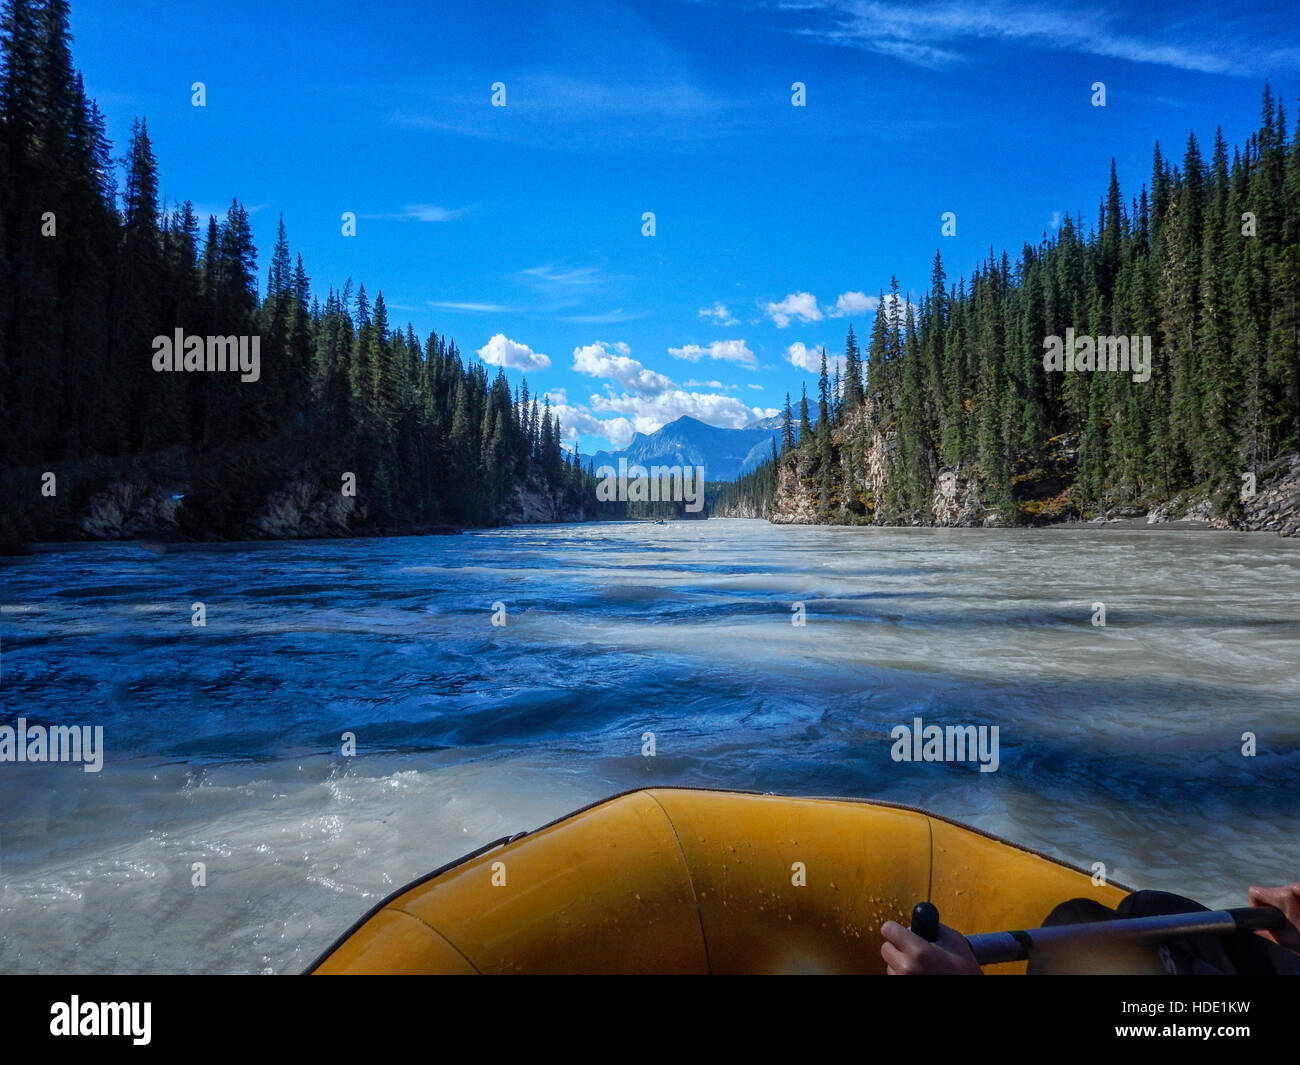 View on a river from inside a wild water raft Stock Photo